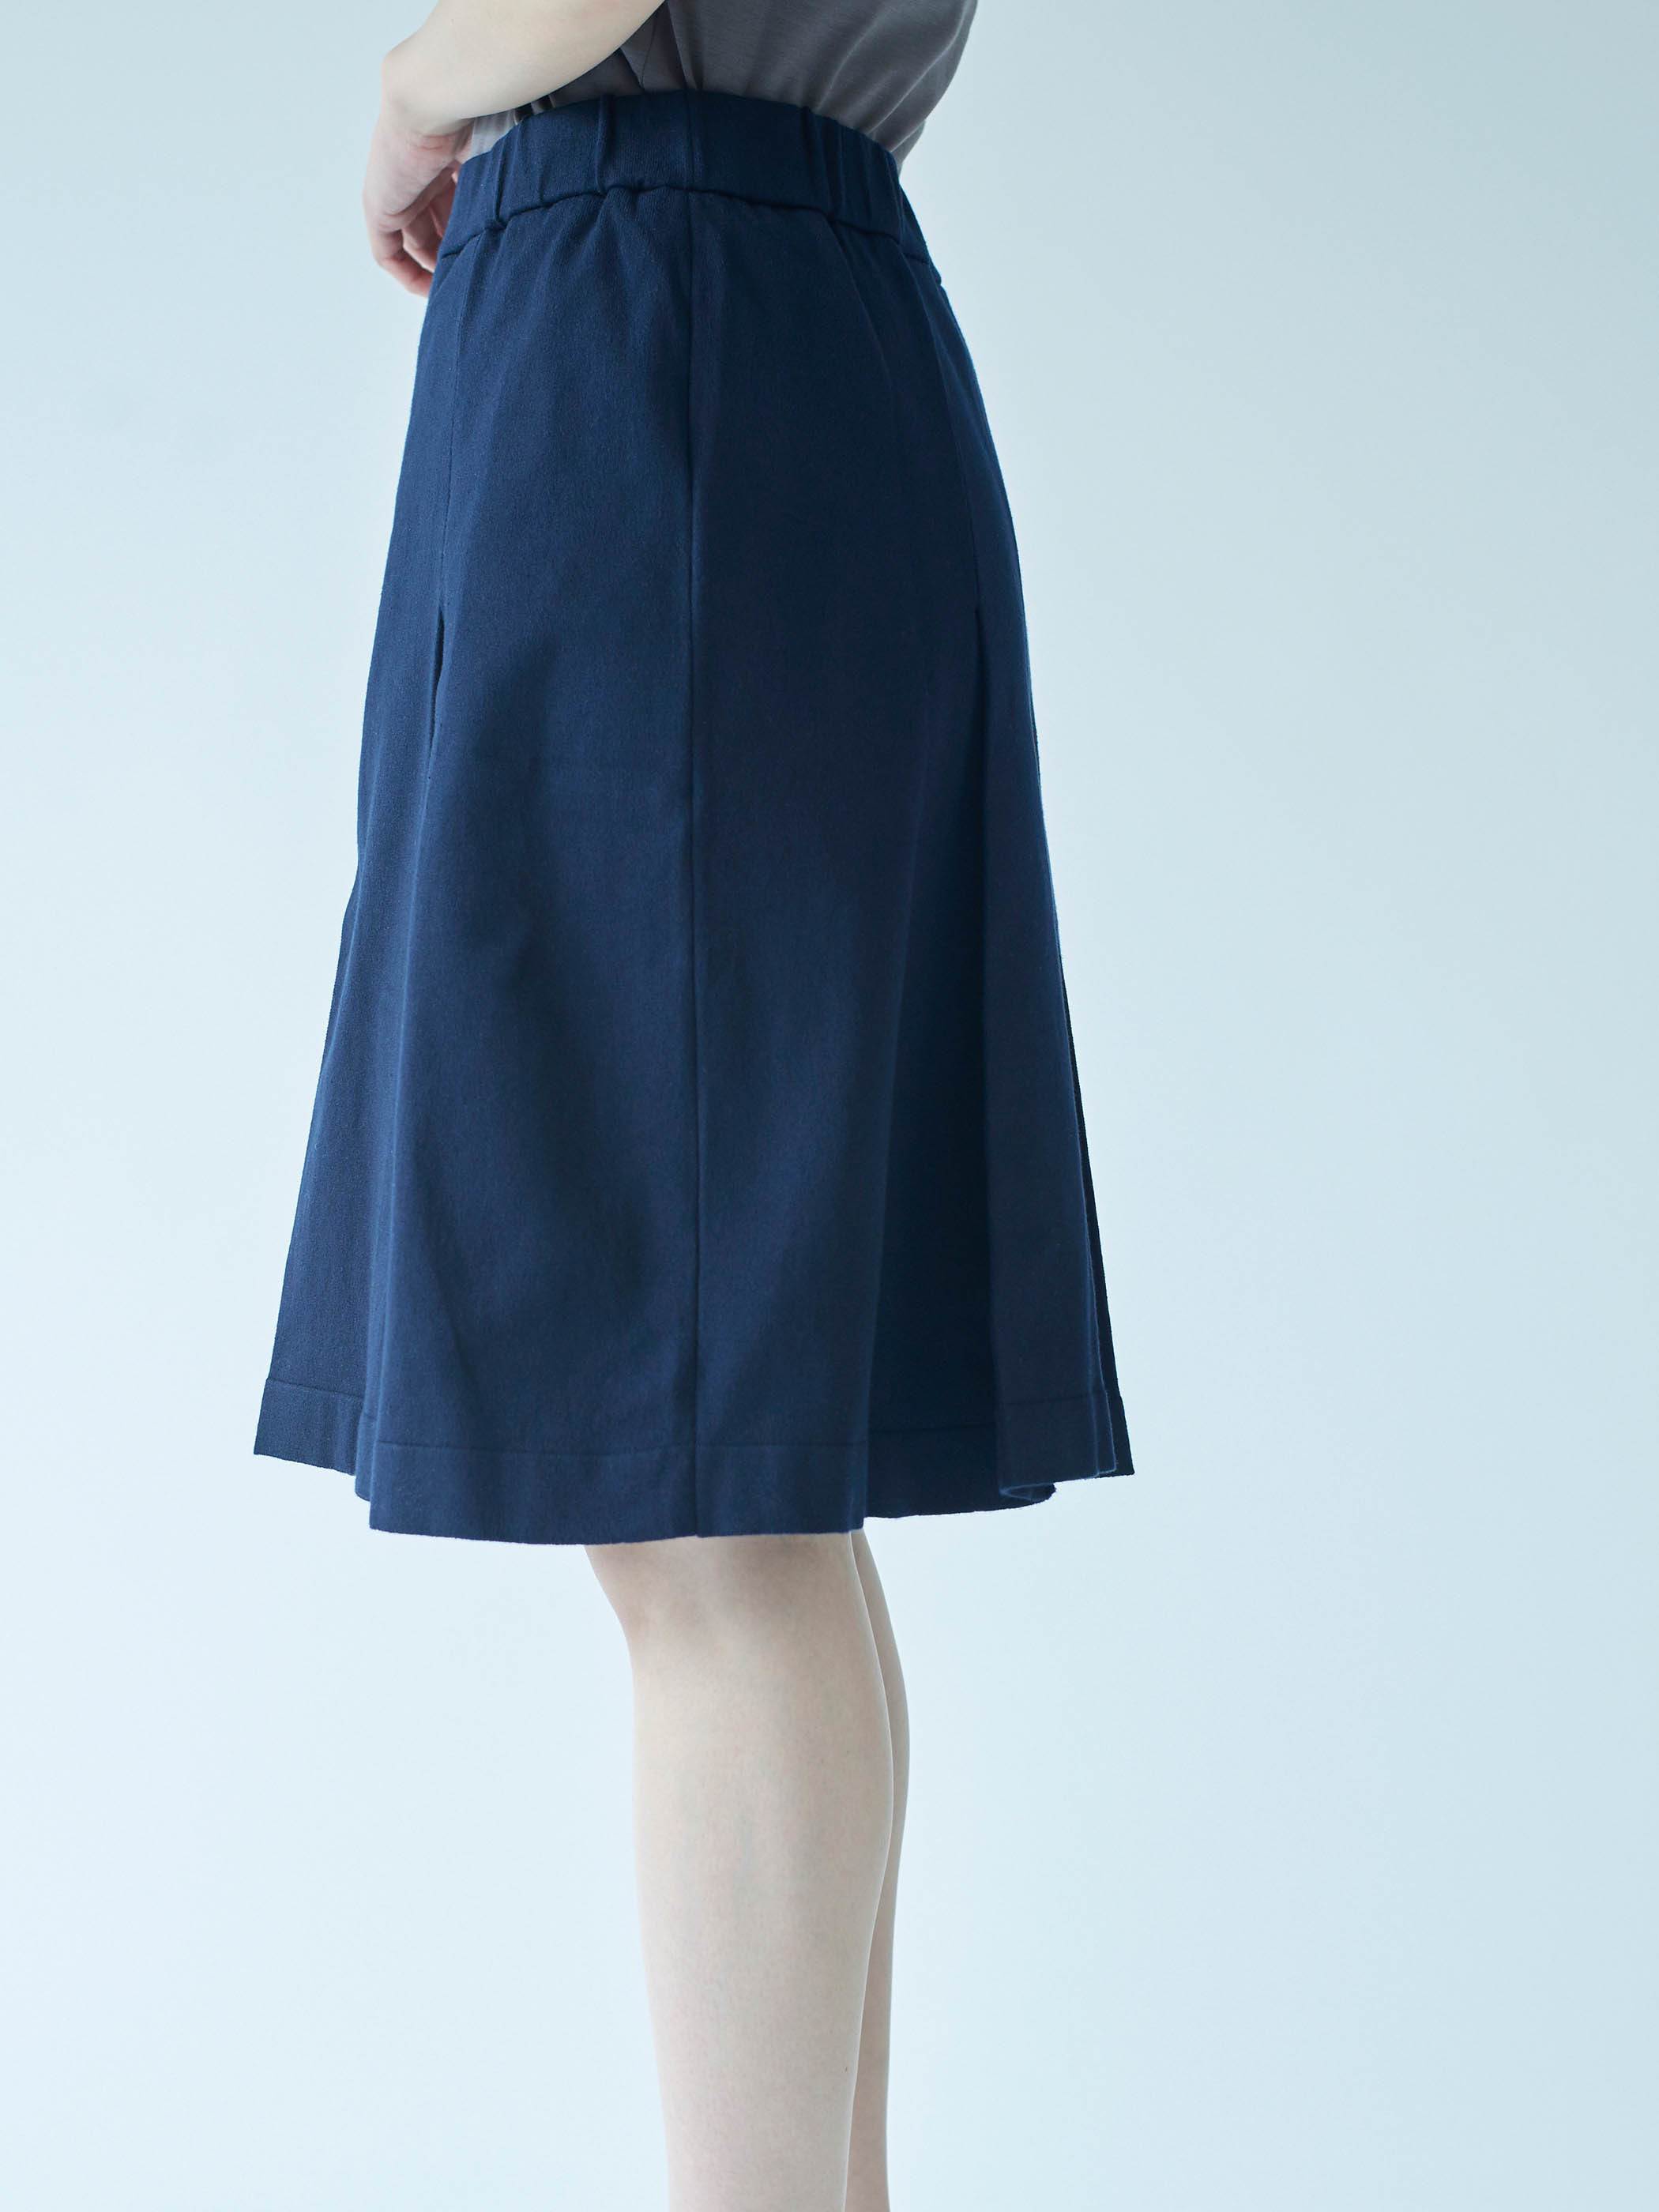 KNITOLOGY | Work Wear collection Women's Culotte Skirt Navy